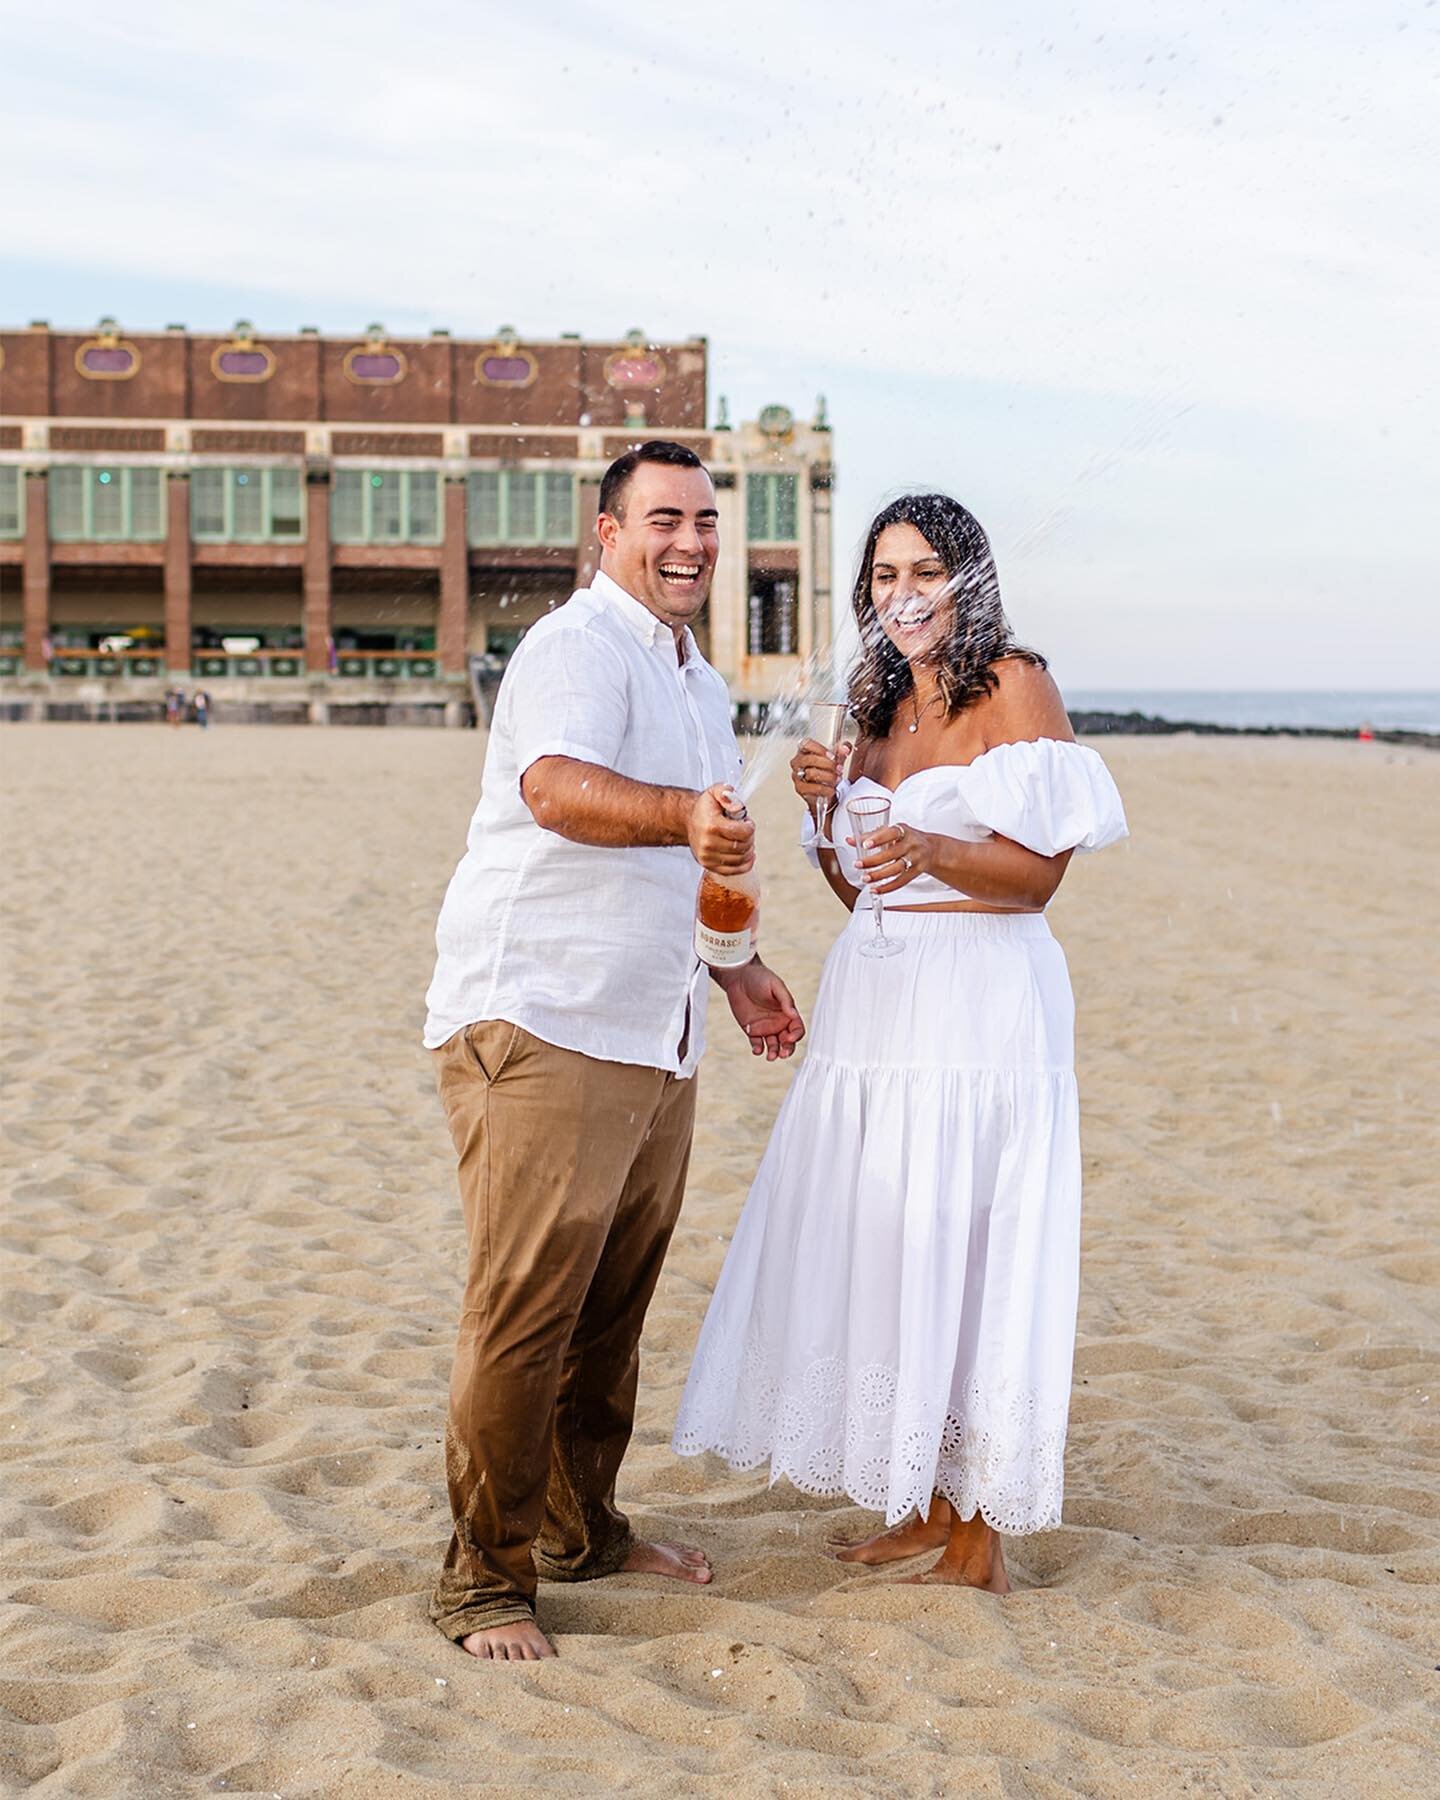 What an awesome time photographing Jess and Johnny&rsquo;s engagement session at Asbury Park. Looking forward to photographing their wedding next year @ballyowengc 

#2024brides #njweddings #njweddingphotography #newjerseyweddings #njweddingvenues #e